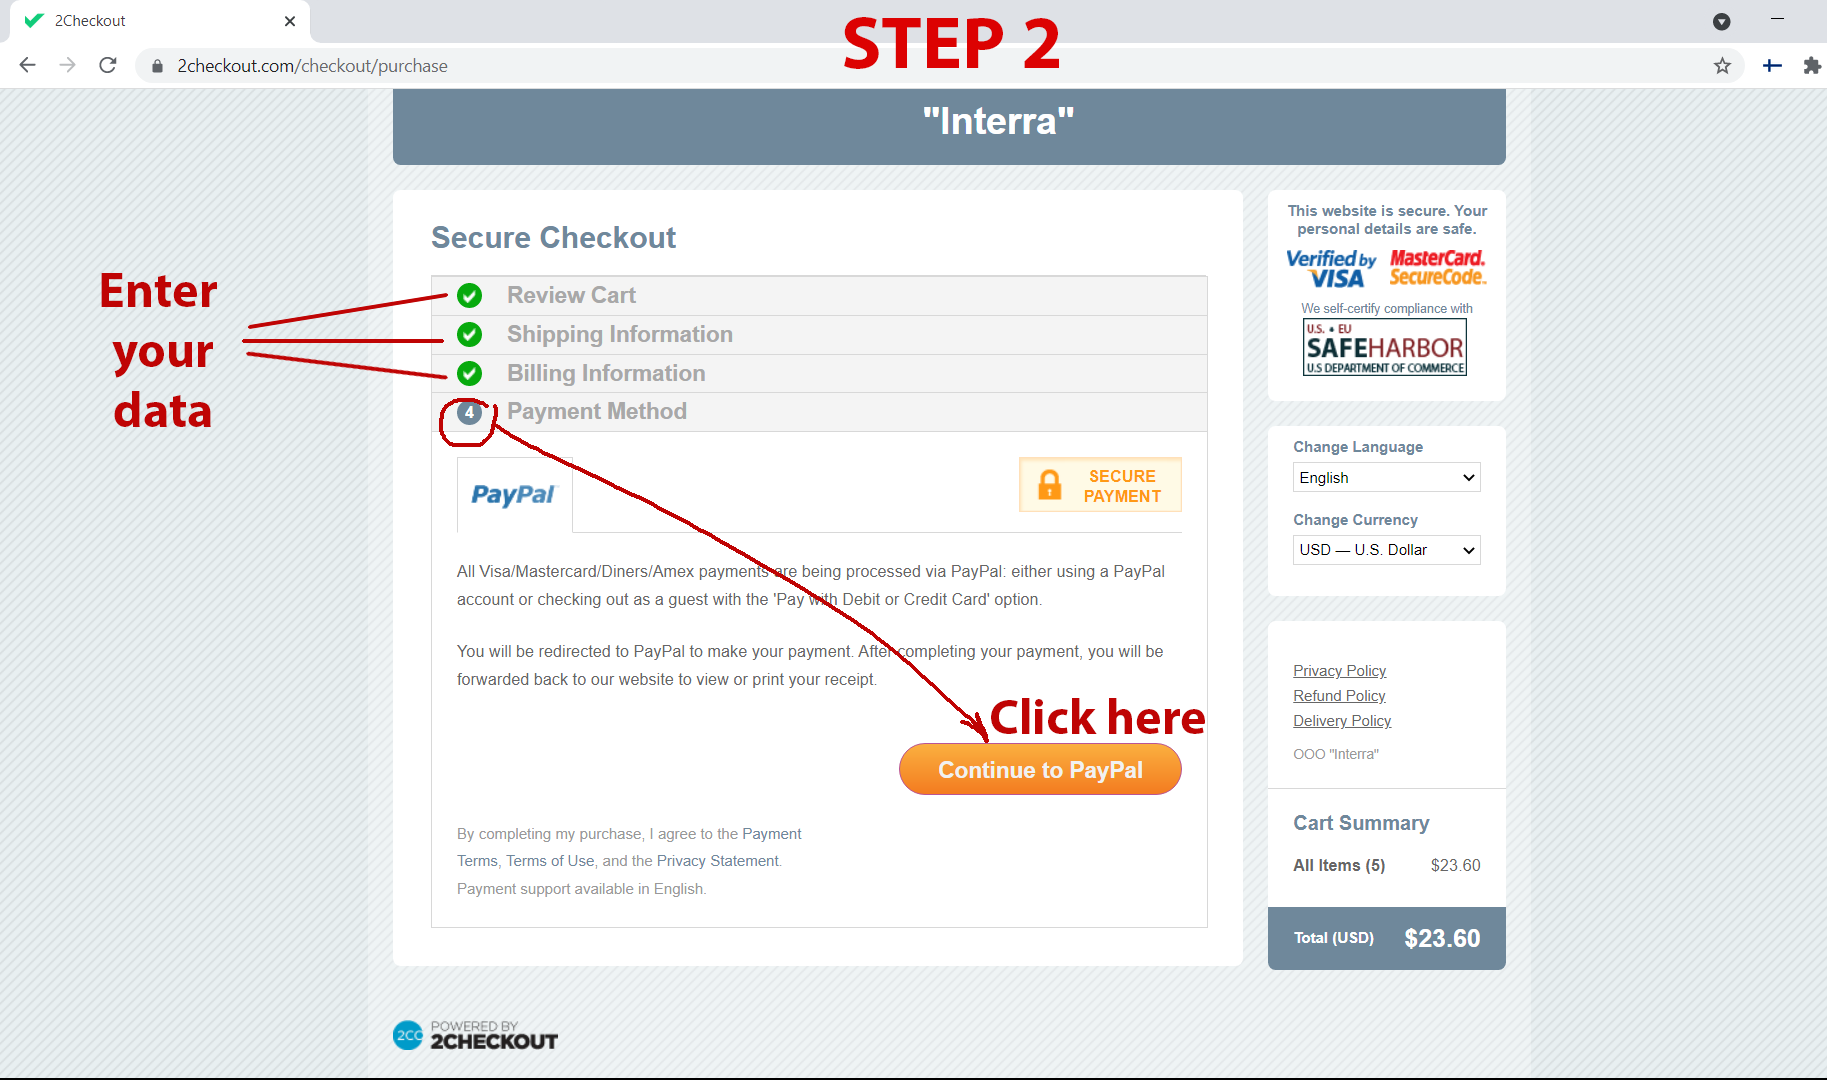 Card_Payment_instructions/Step_2a